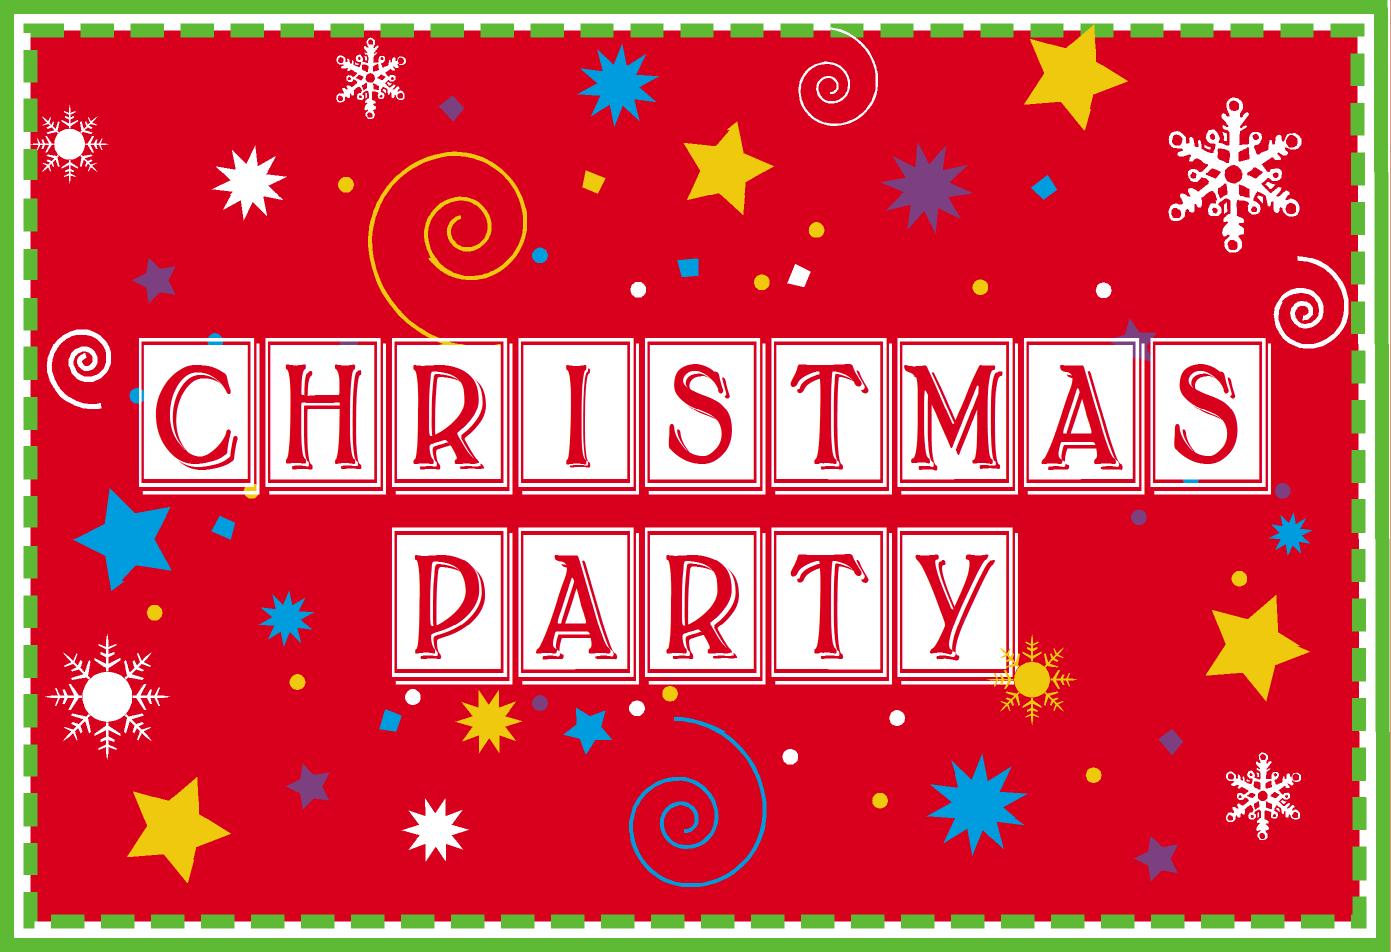 4818800 Christmas Stock Photos Pictures  RoyaltyFree Images  iStock   Christmas background Christmas party Christmas tree